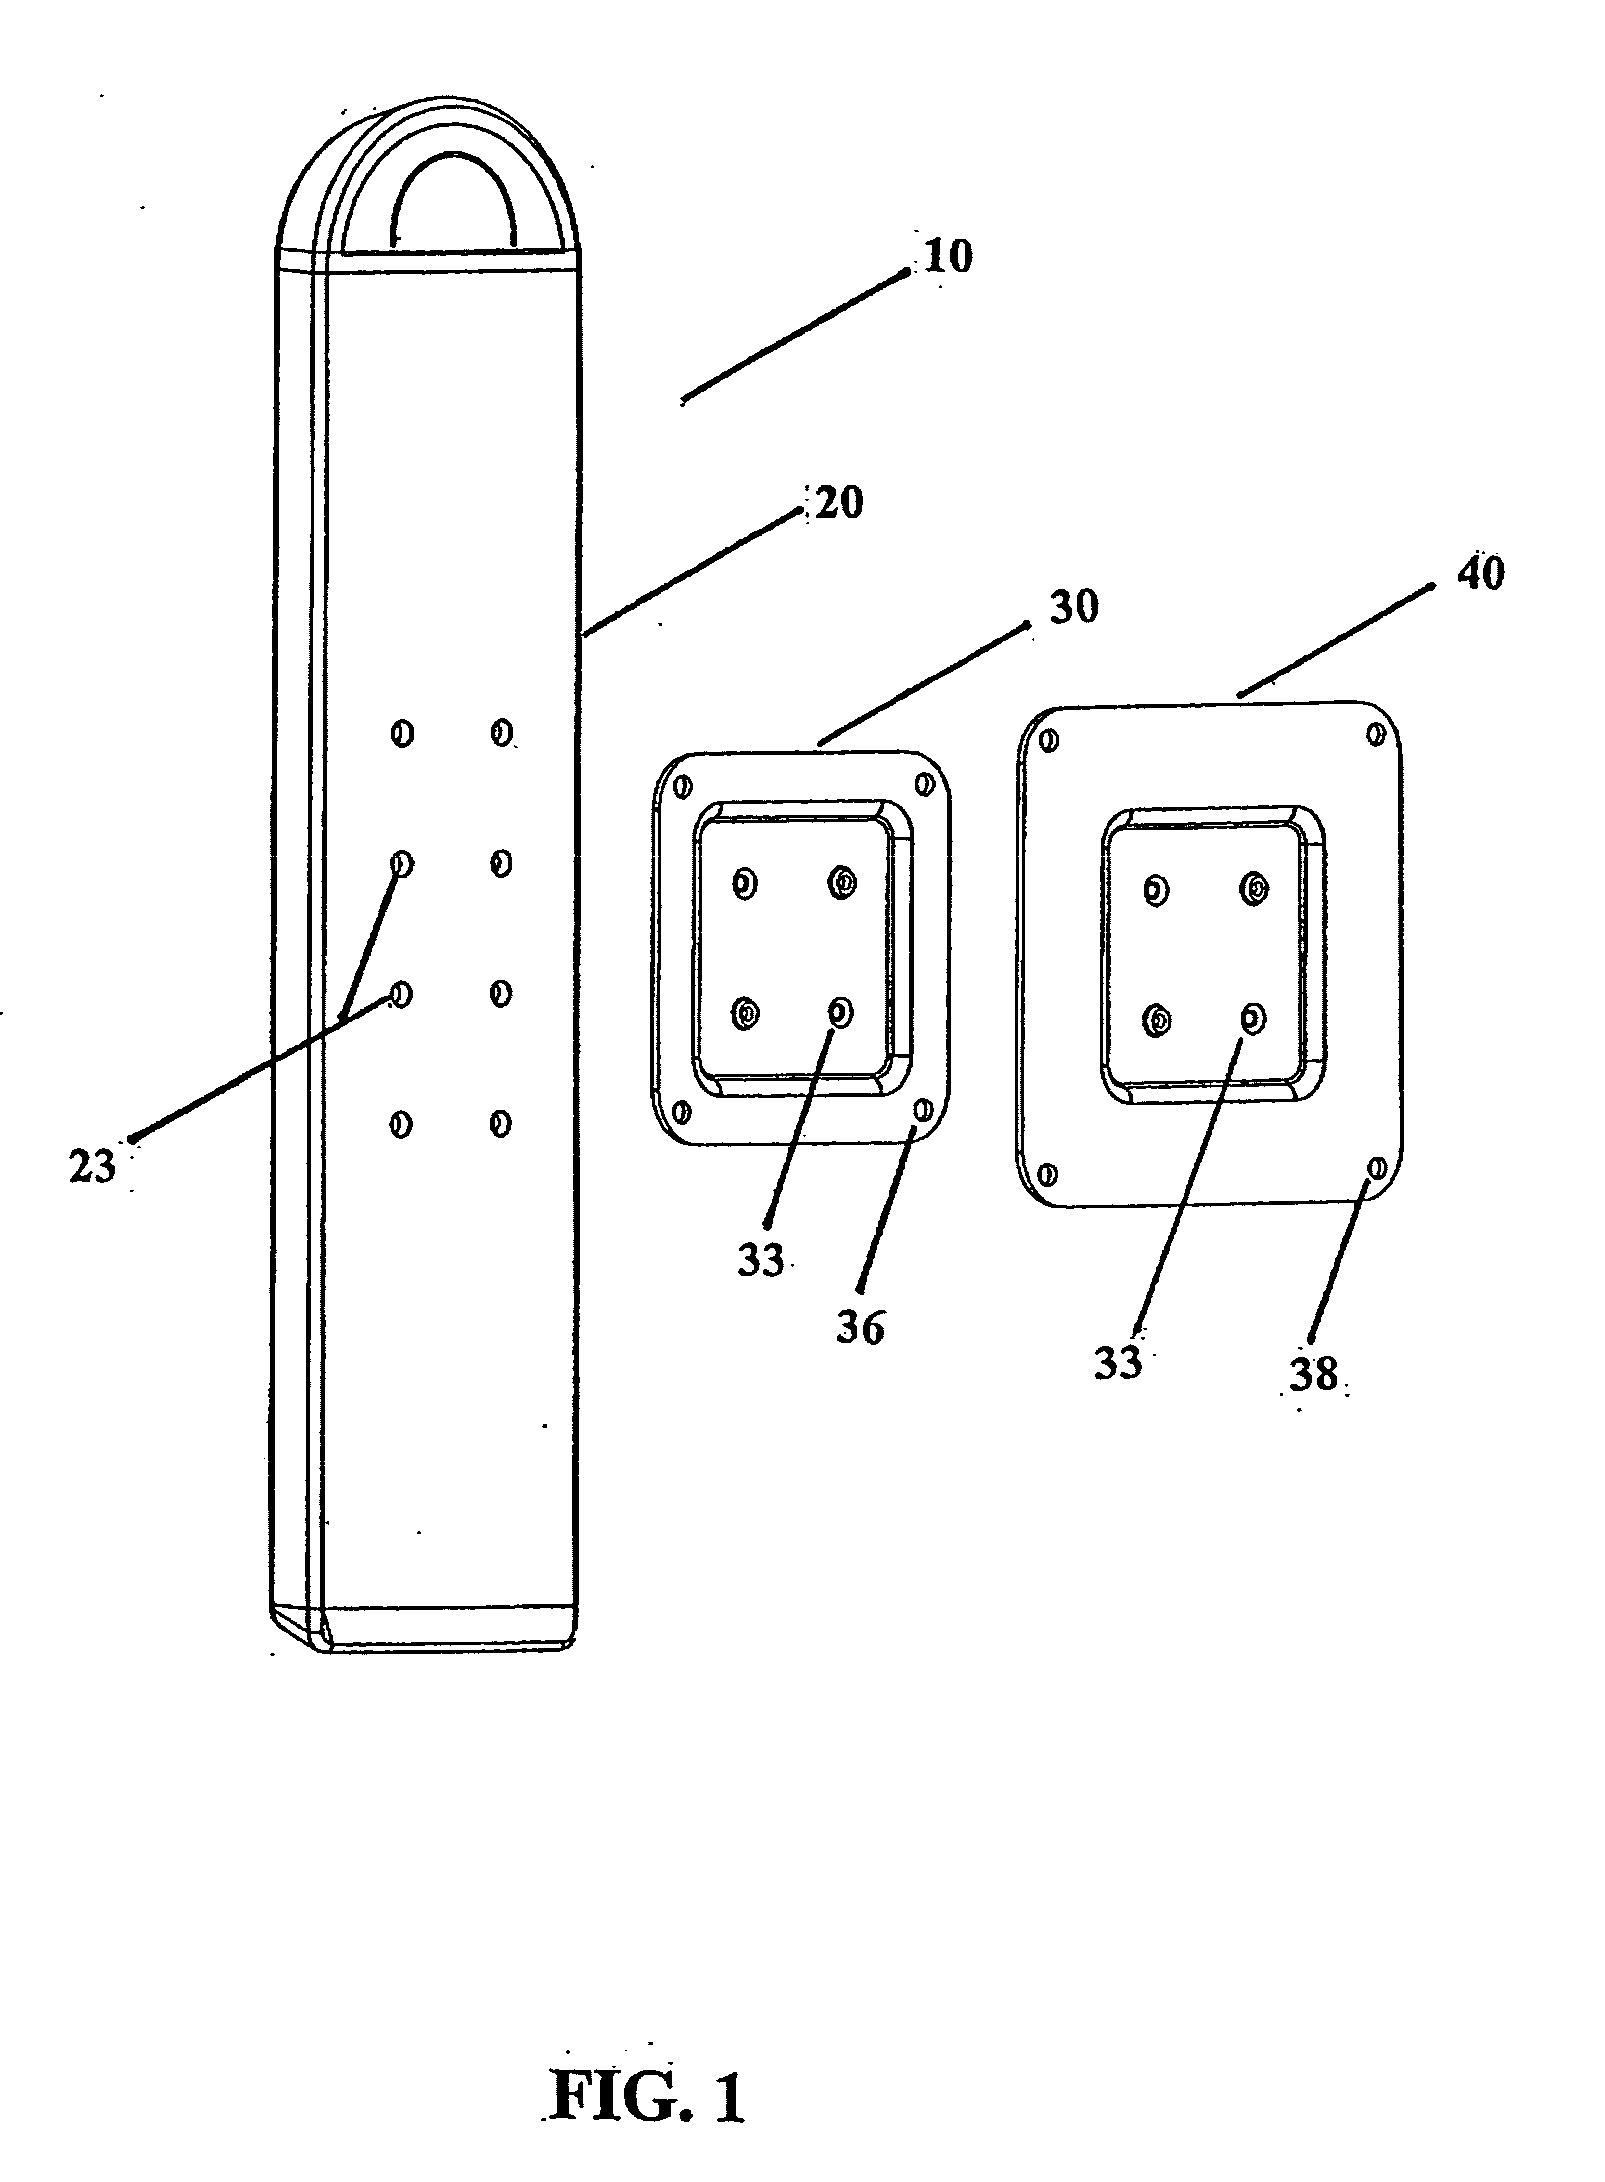 Mechanism for positional adjustment of an attached device